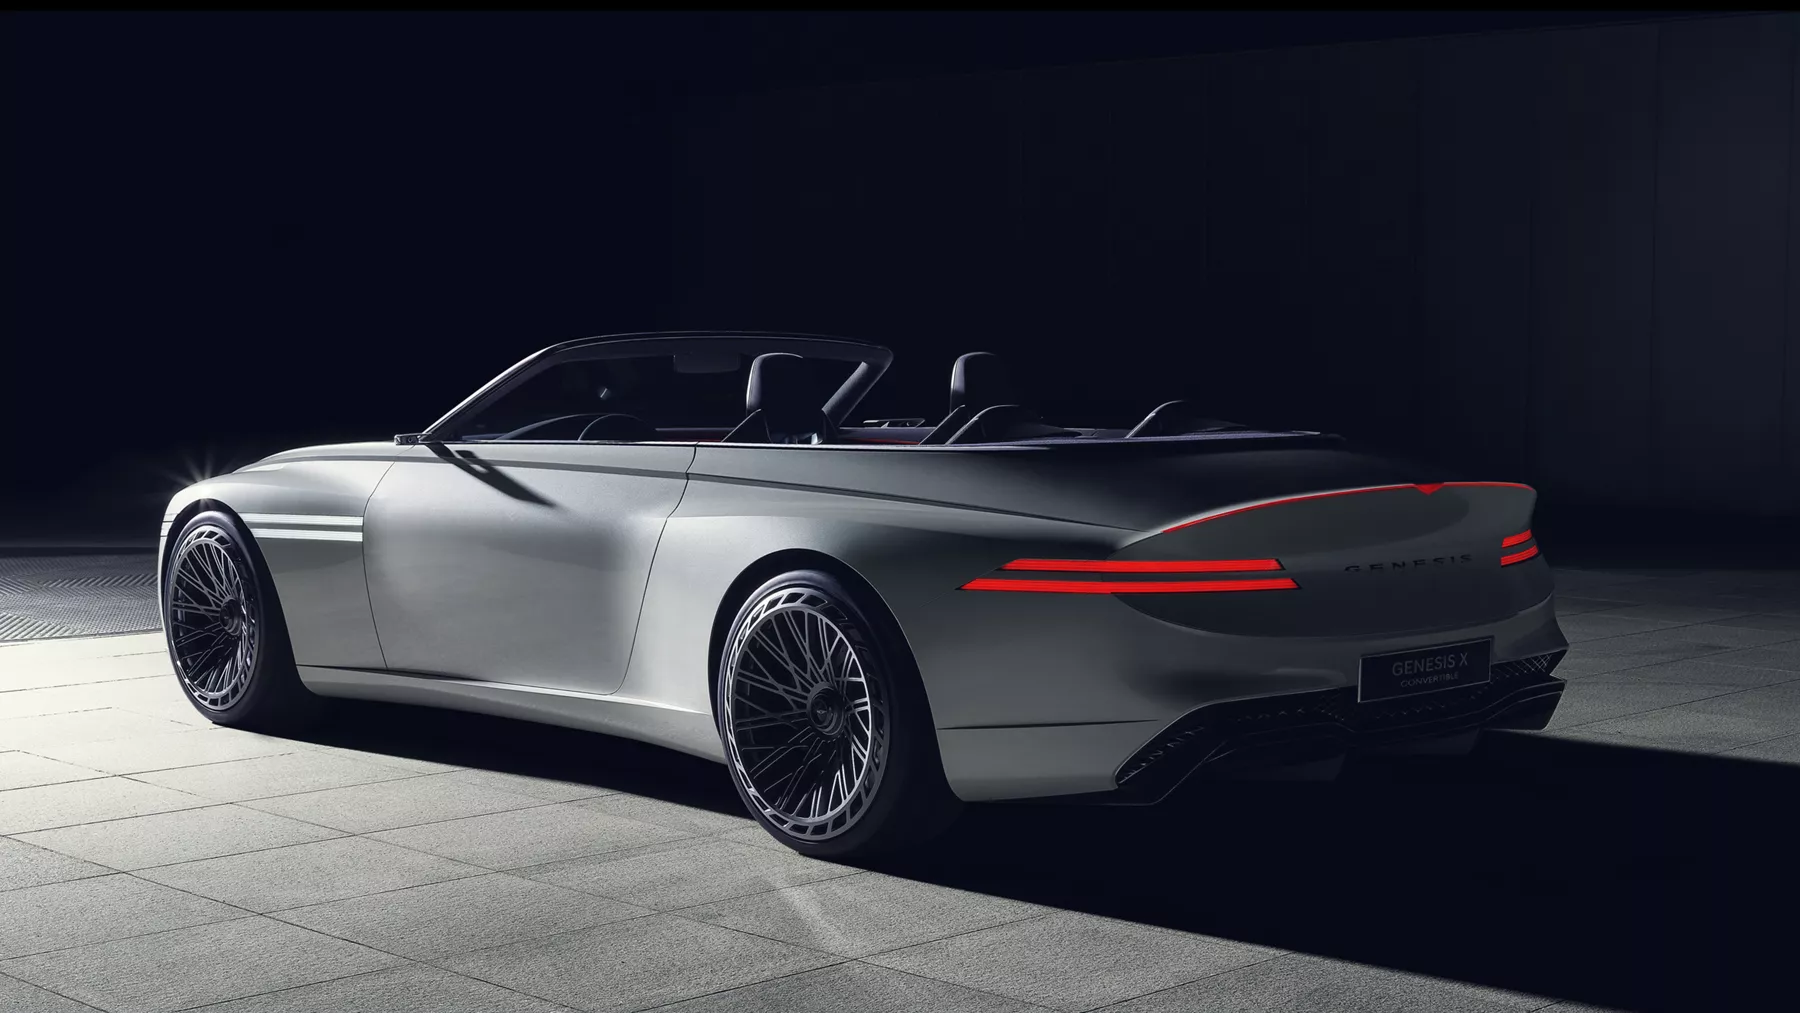 Rear view of X Convertible Concept at night with taillights illuminated.